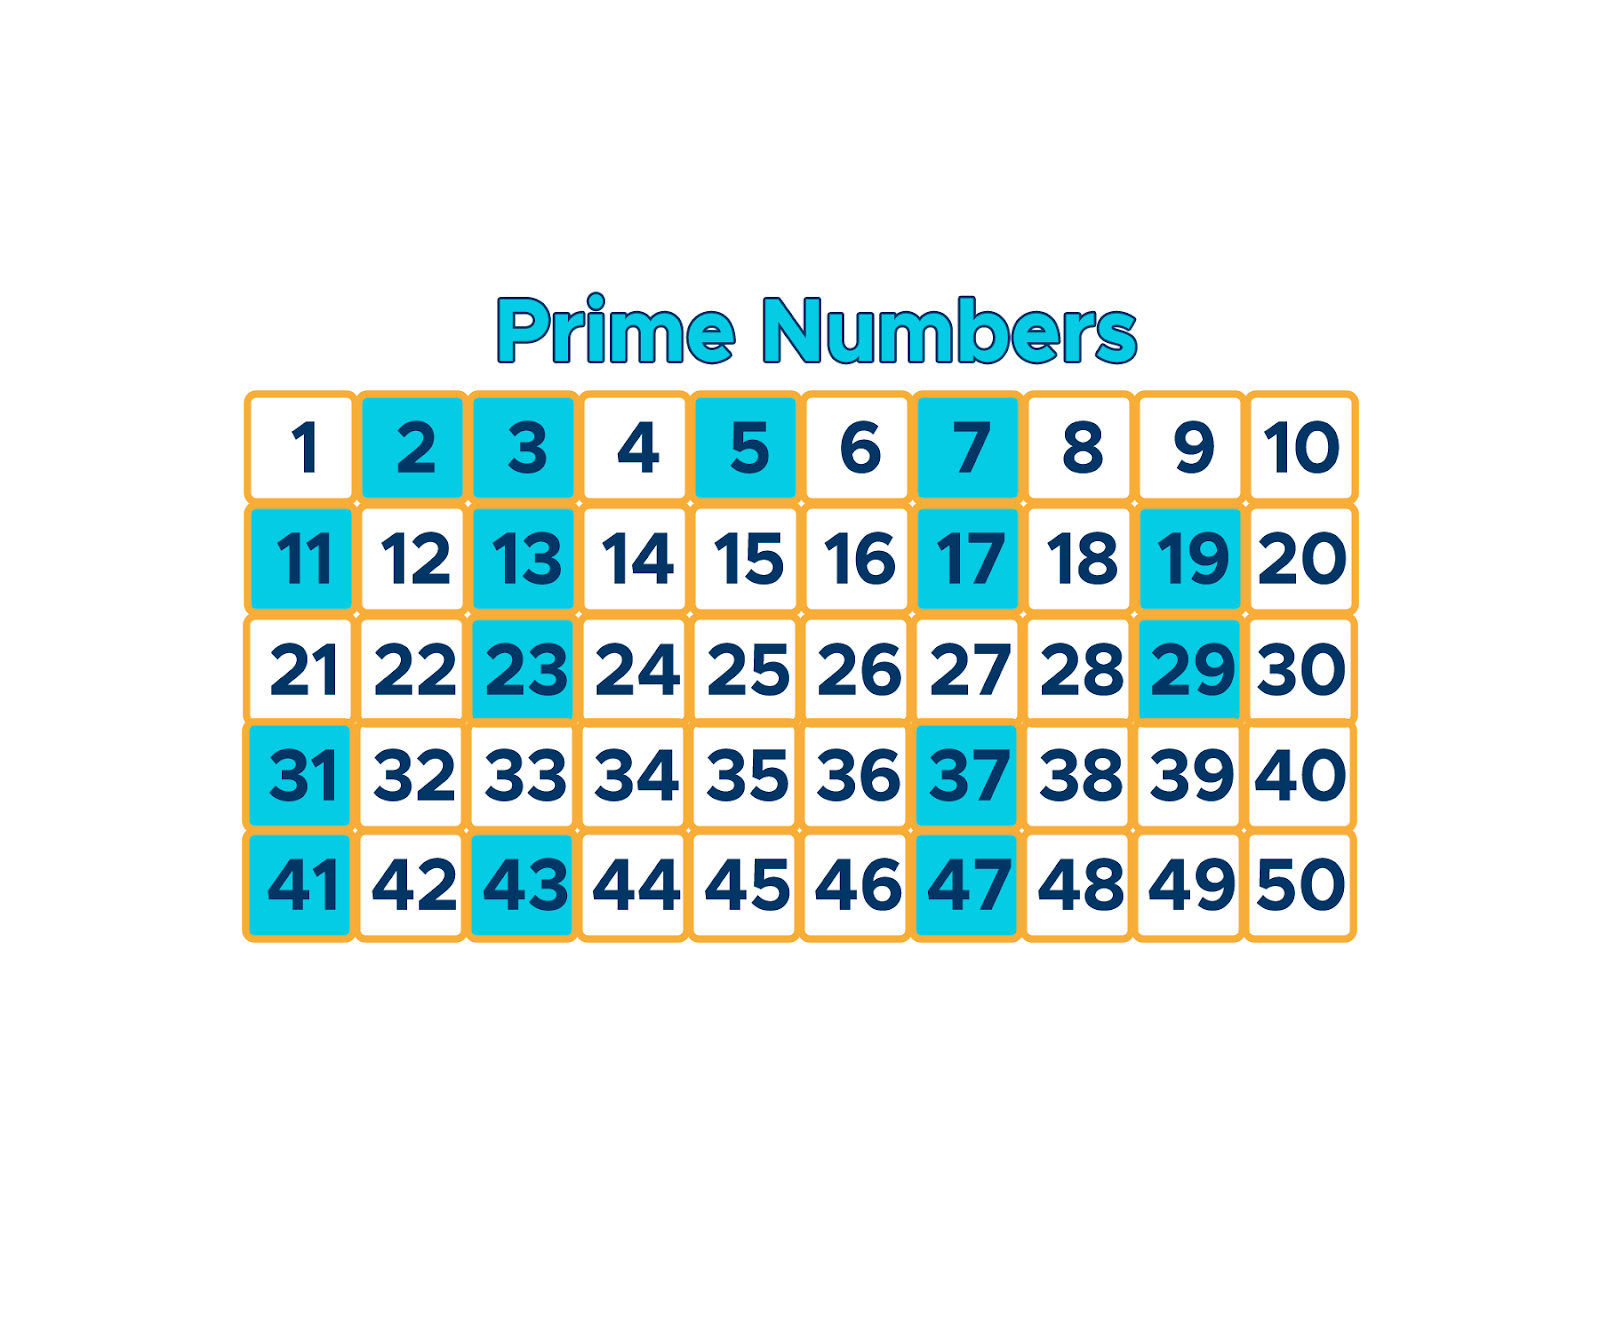 Prime Numbers and Composite Numbers 1-50